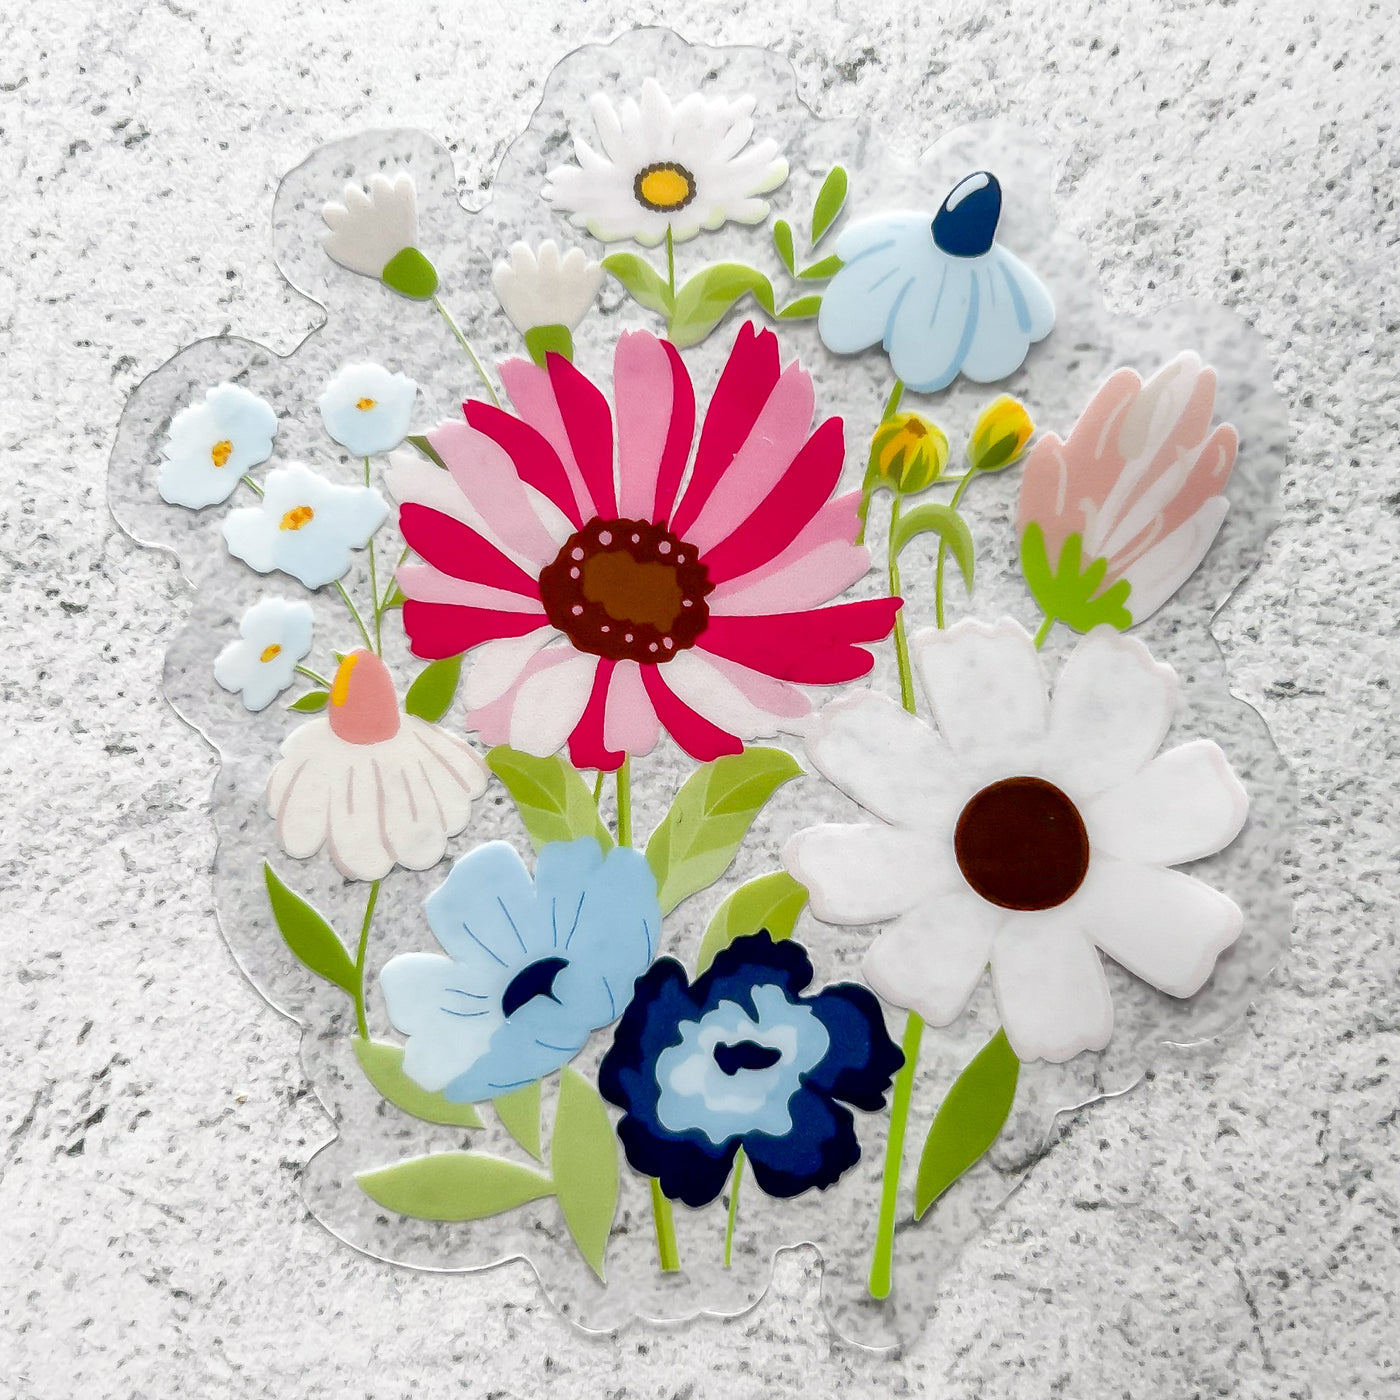 Spring blooms bouquet clear vinyl sticker by Simpliday Paper Olga Nagorna.